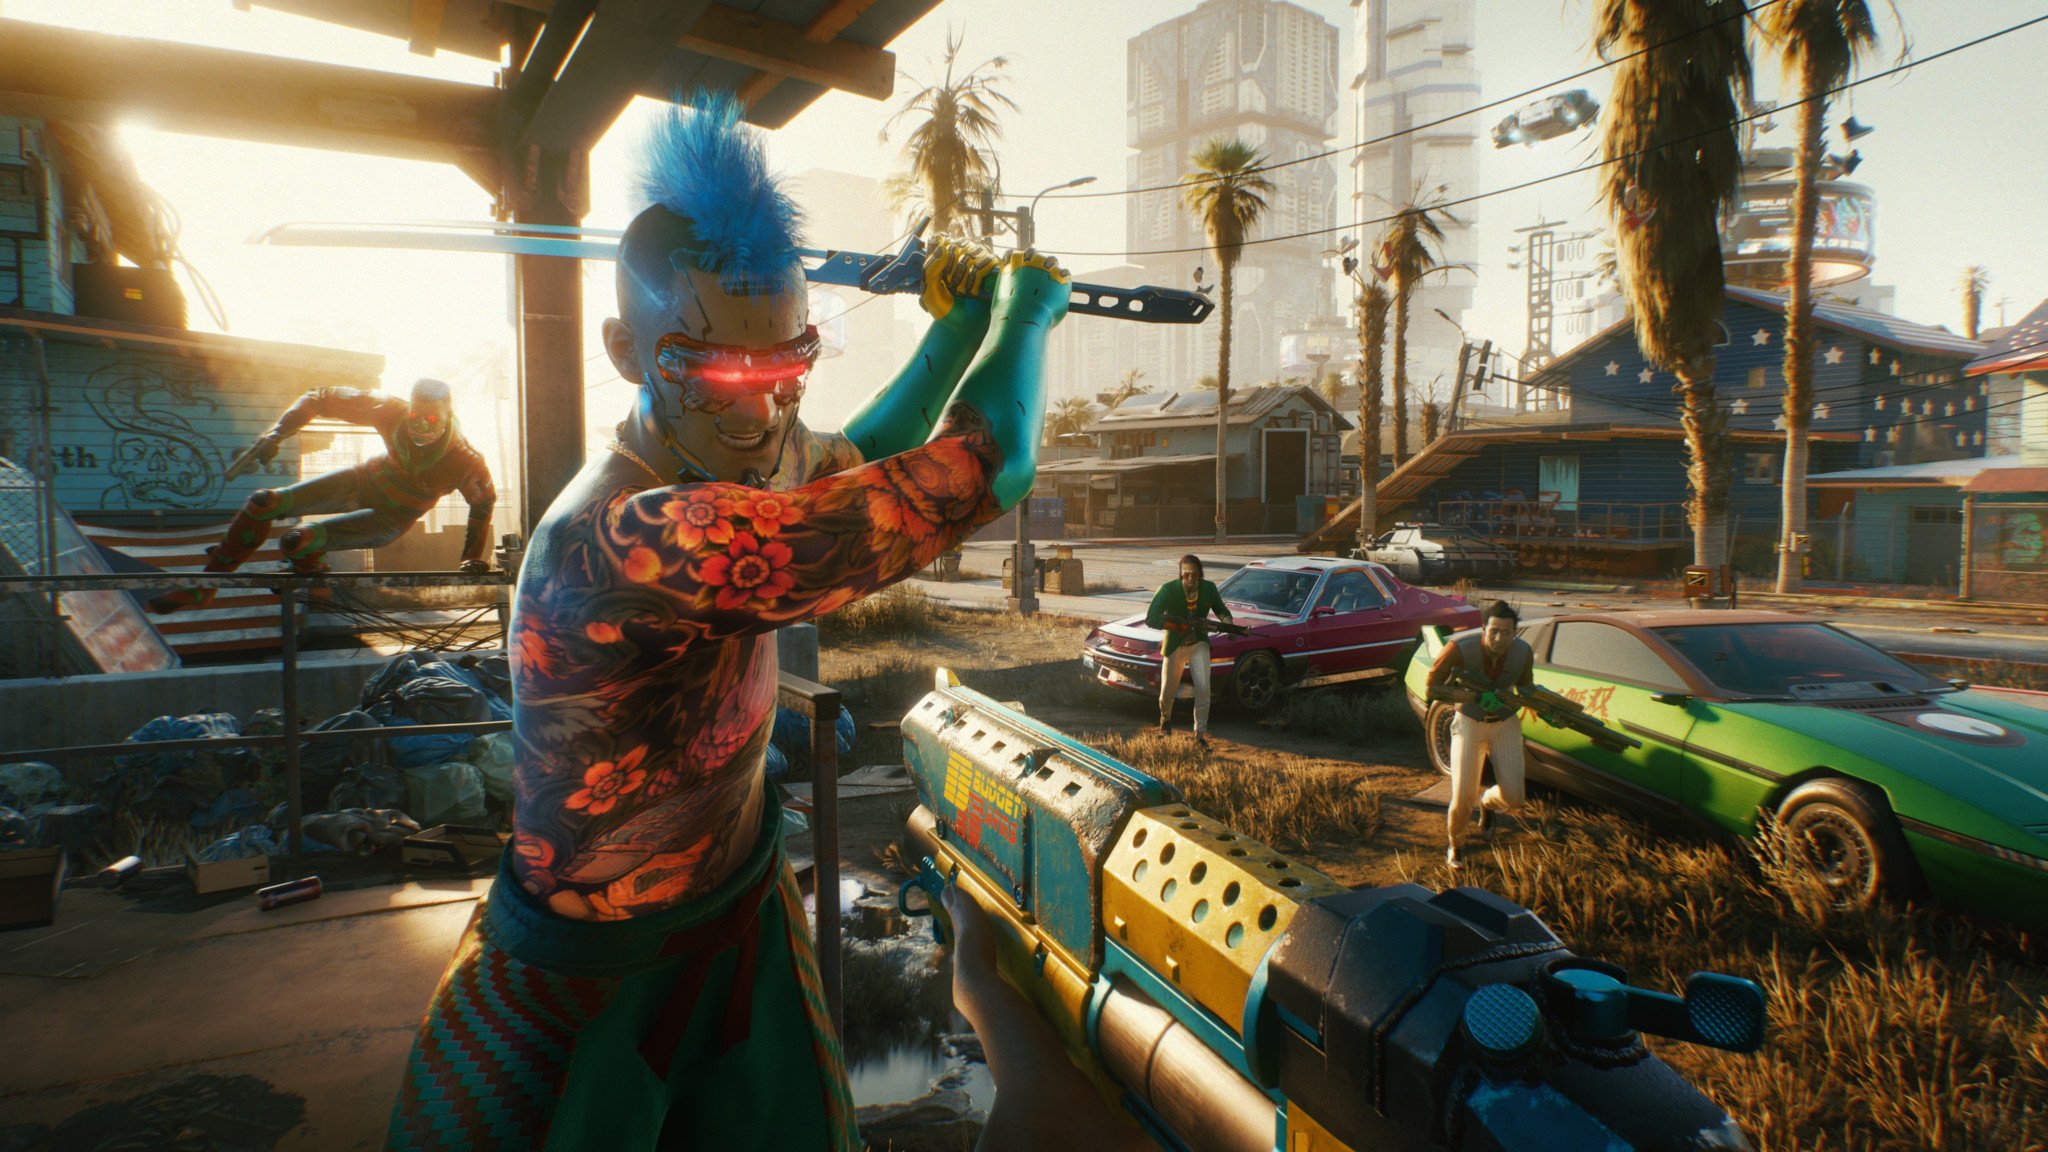 Cyberpunk 2077 Hits 1 Million Daily Players Following Anime Release